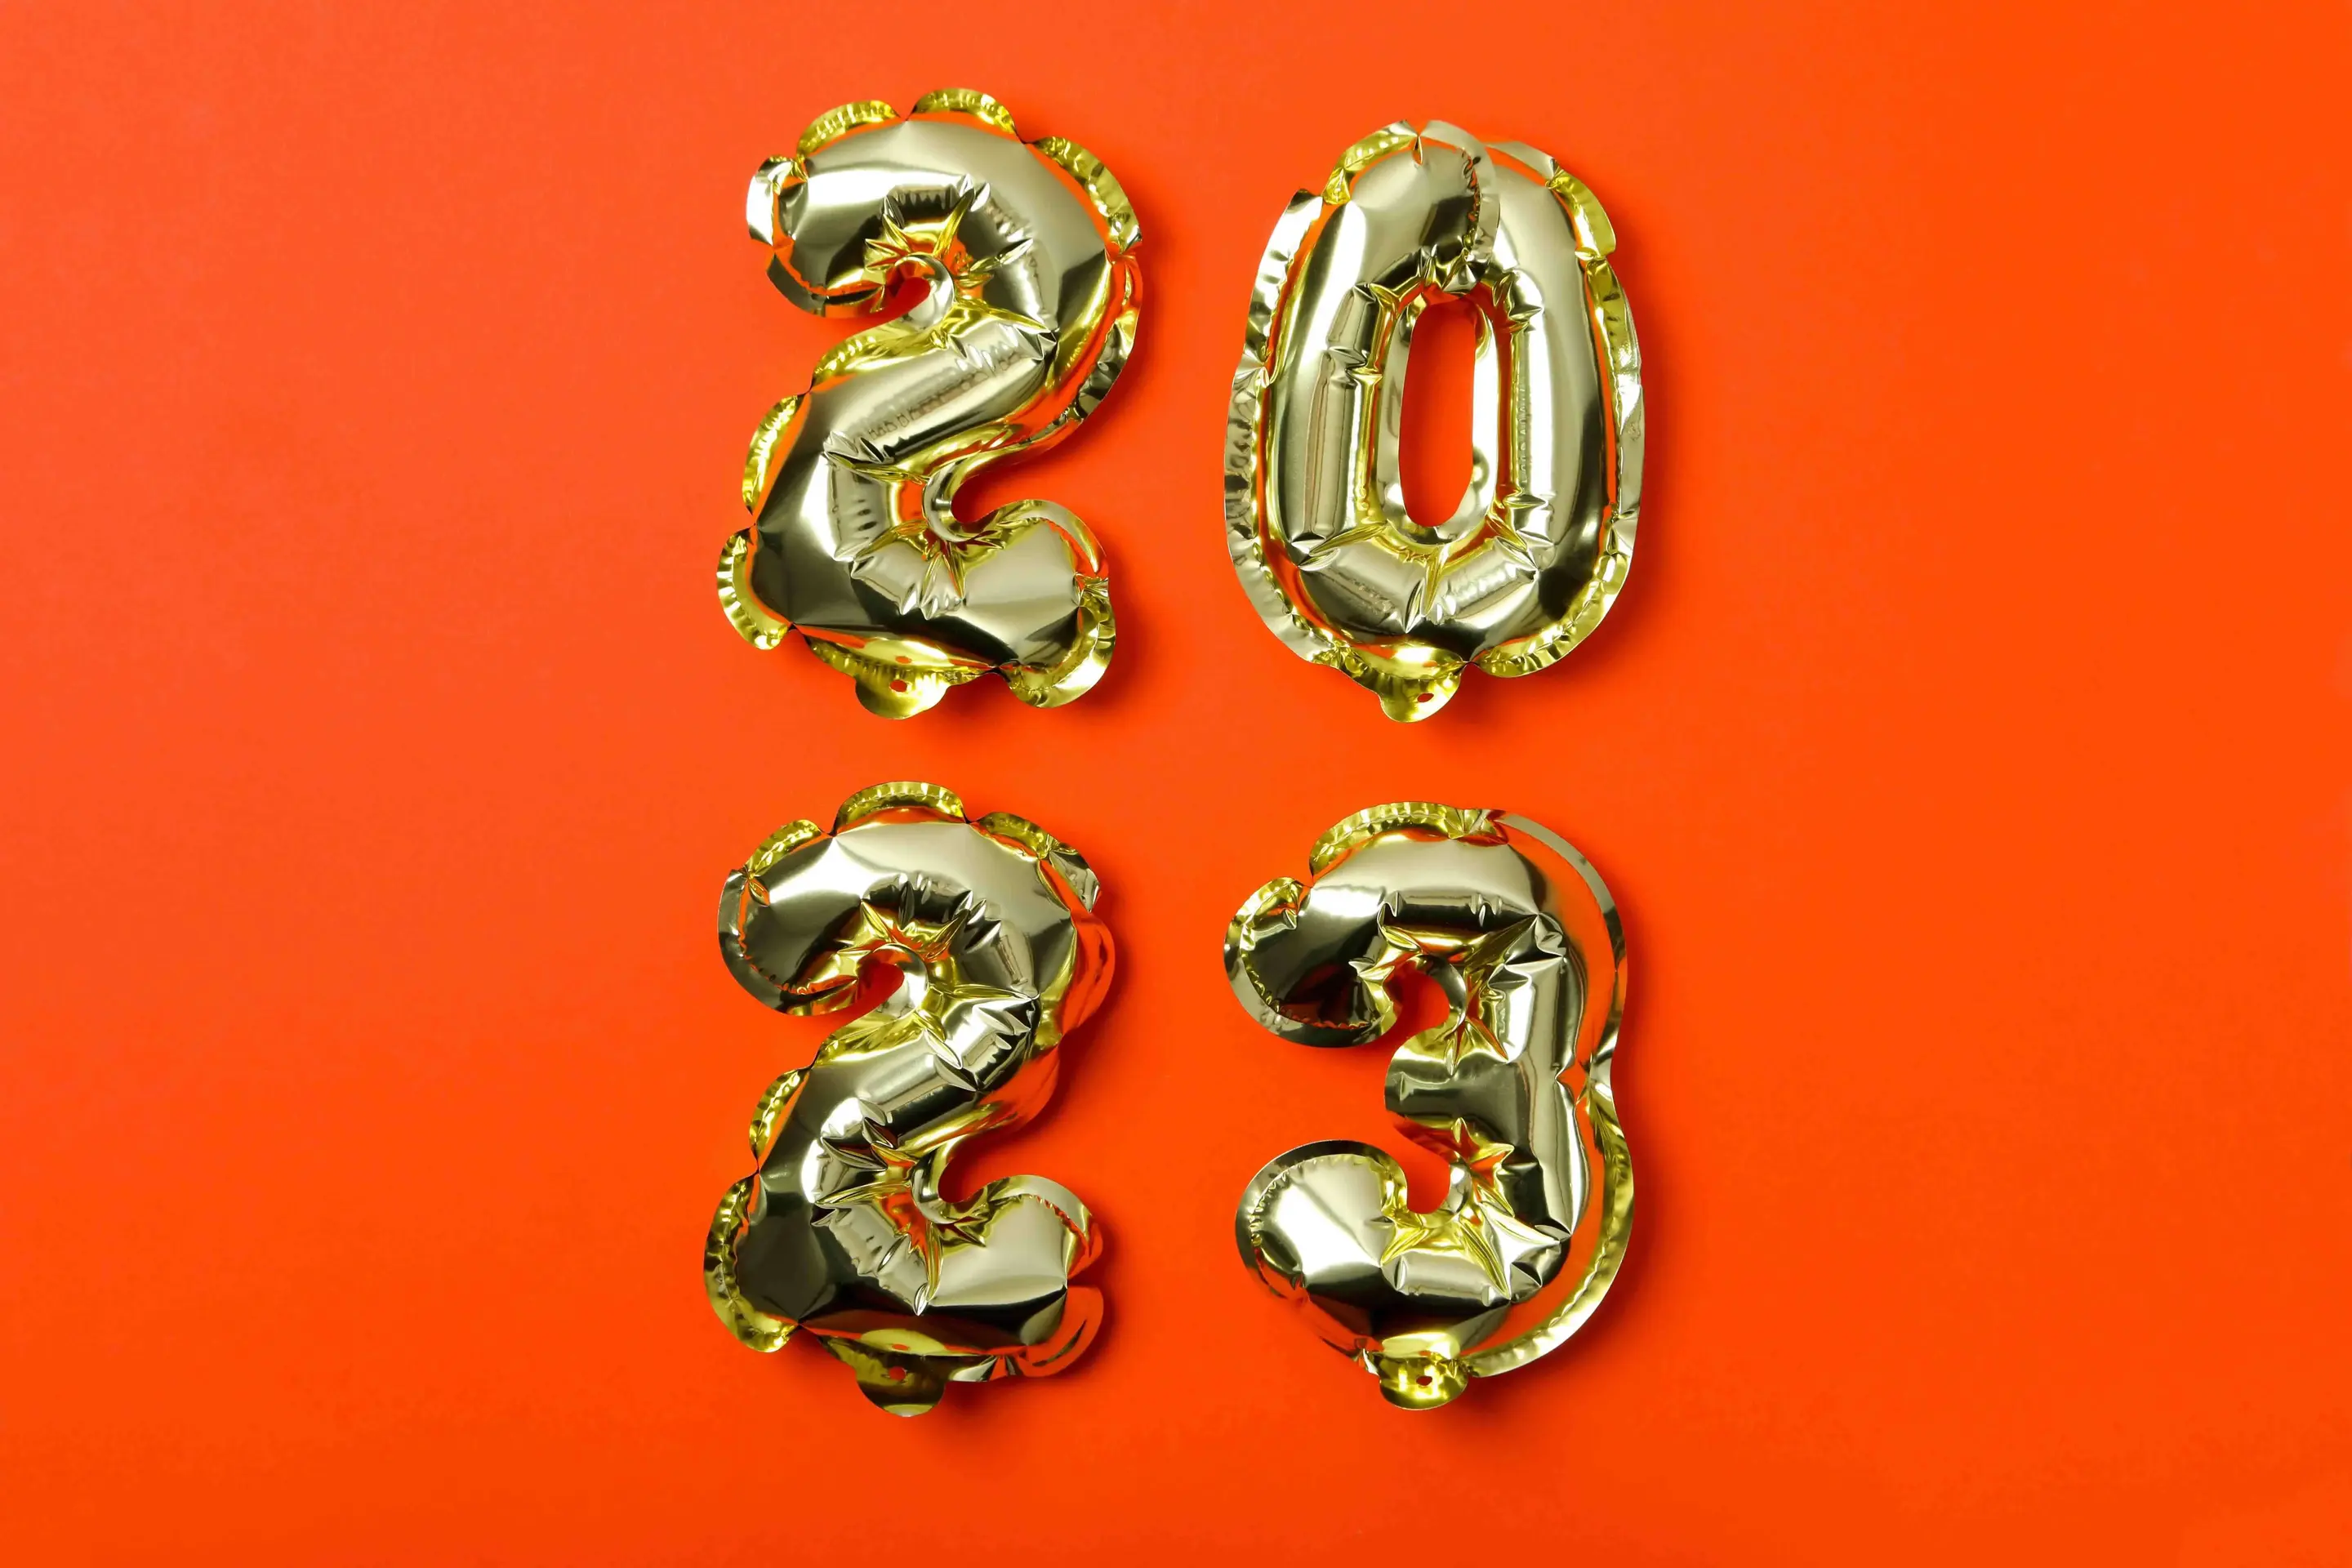 Metallic gold balloons in the form of the number 2023 against a red background